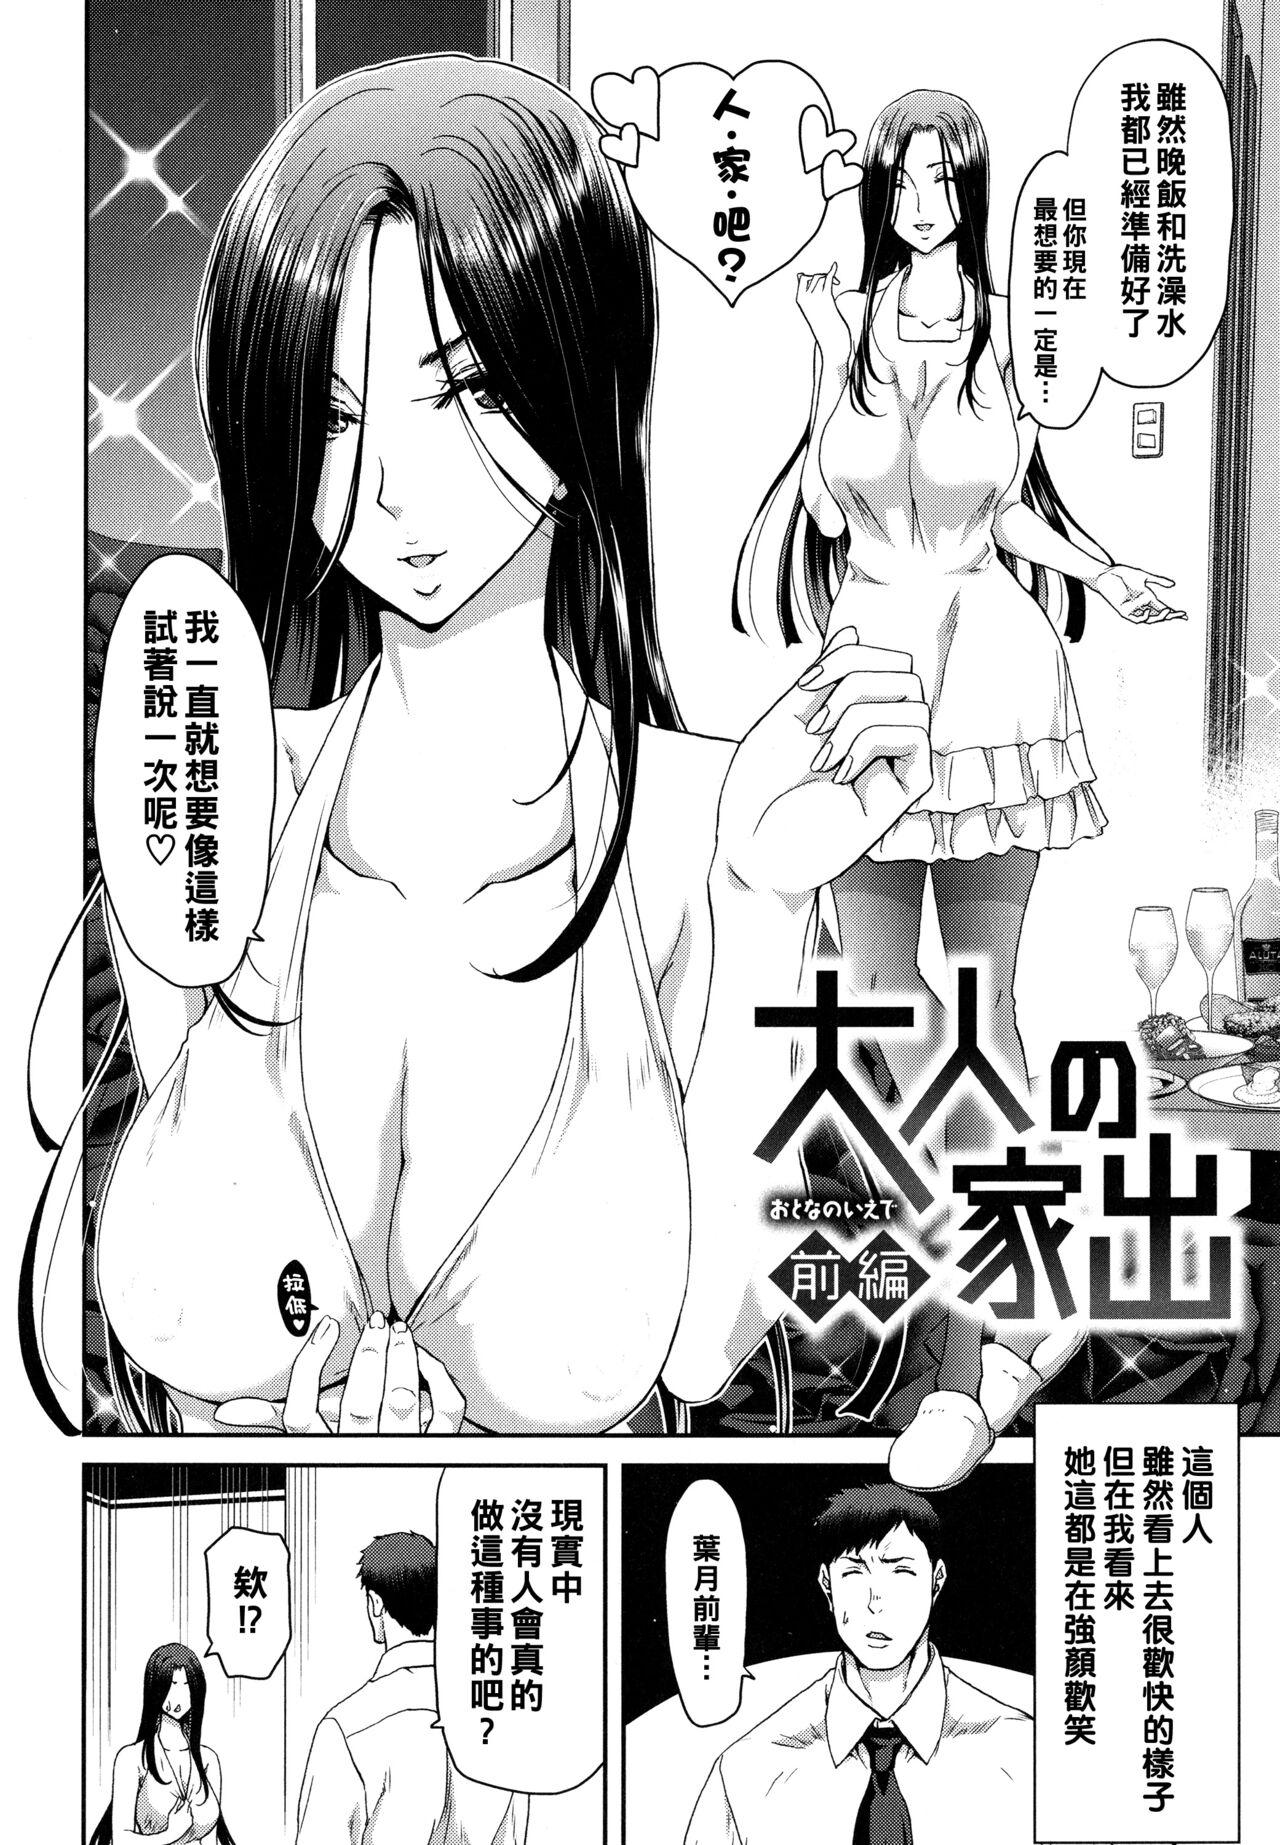 Strap On Iede Onna o Hirottara - When I picked up a runaway girl. Pmv - Page 6